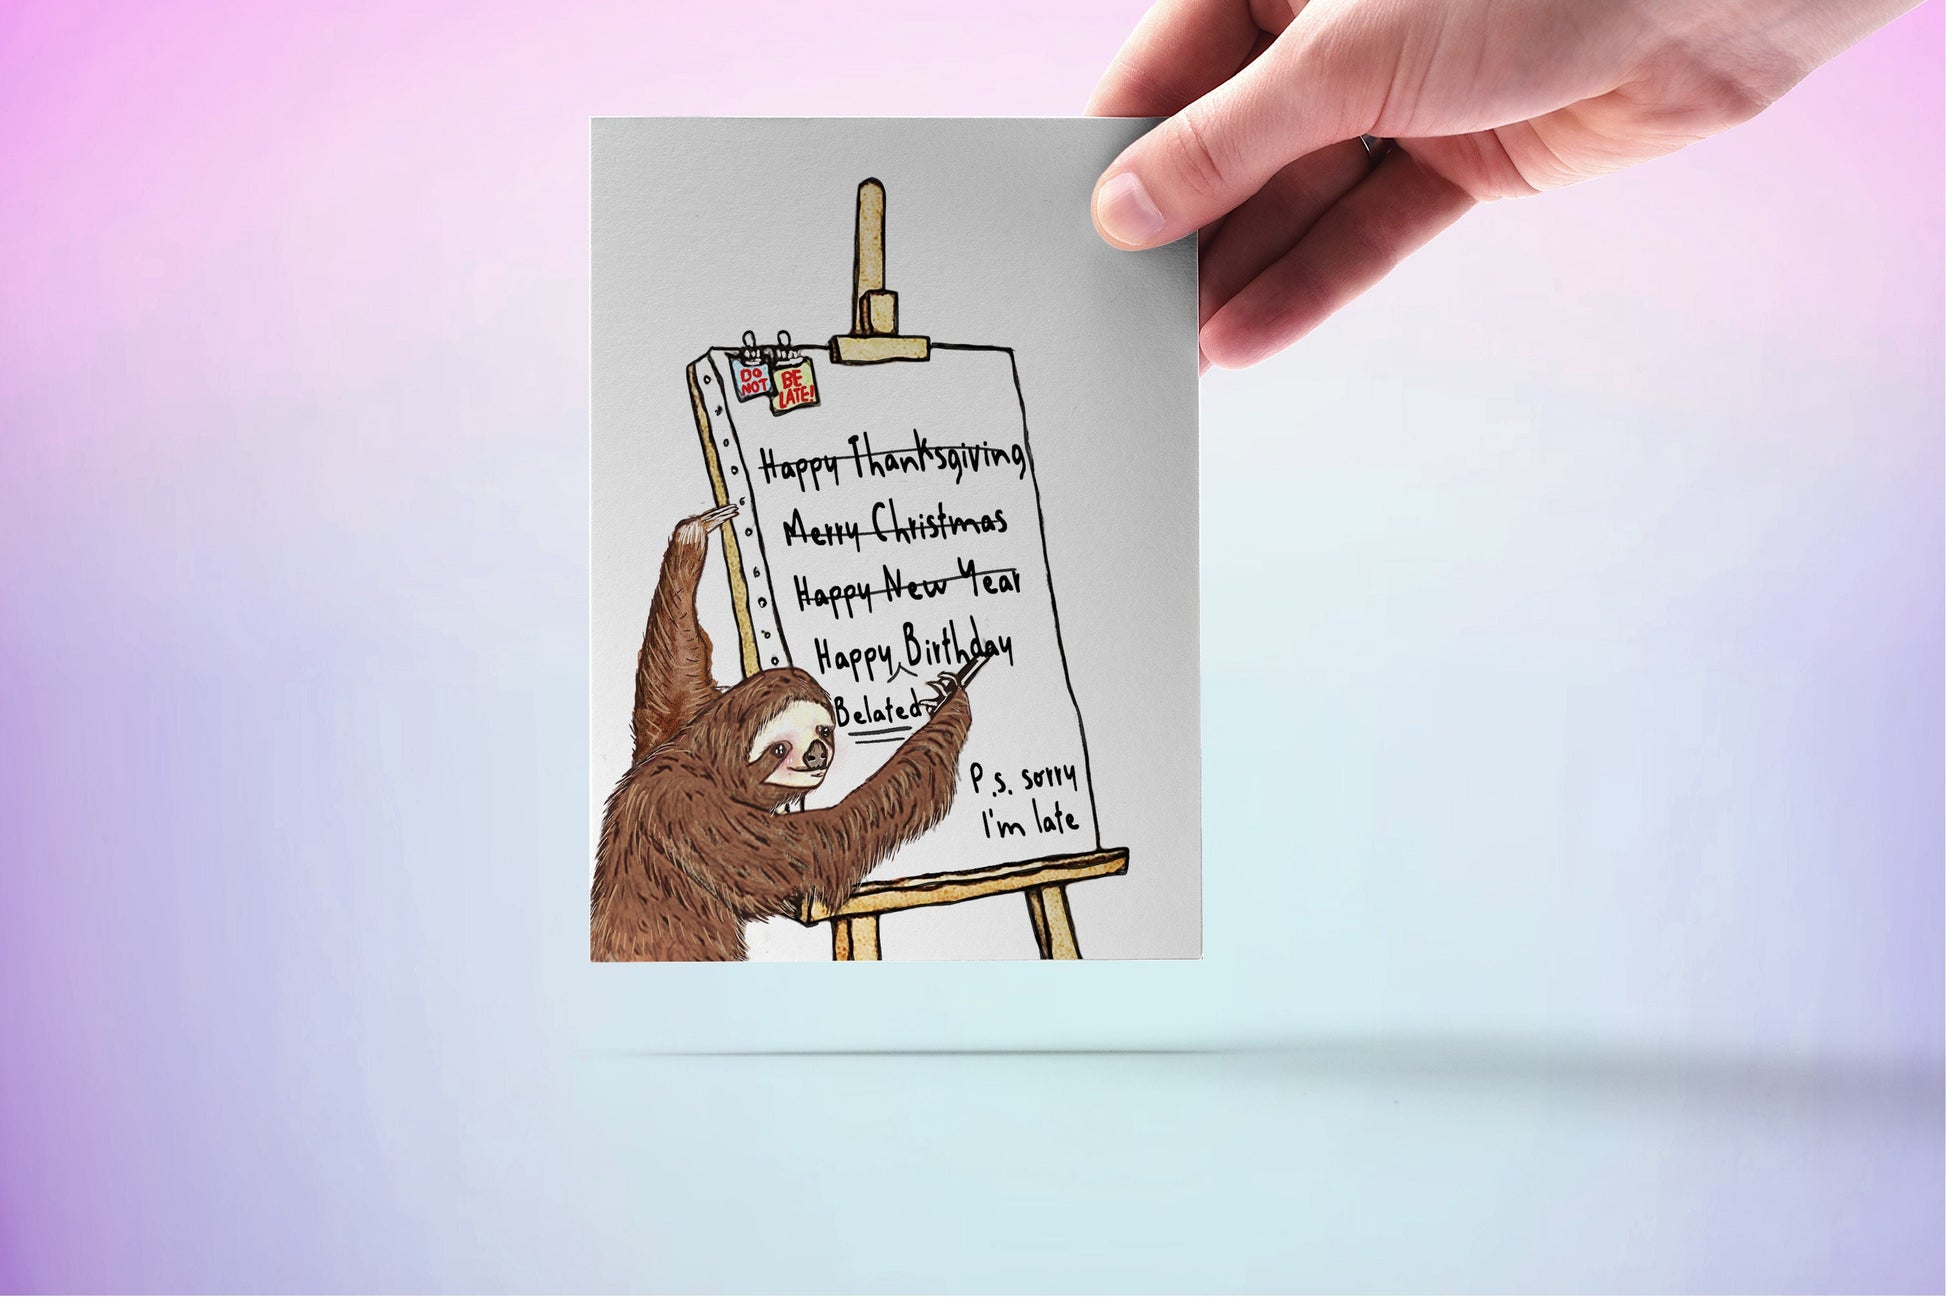 Sloth Late Birthday Card Funny - Sorry I am Late - Happy Belated Birthday Gift